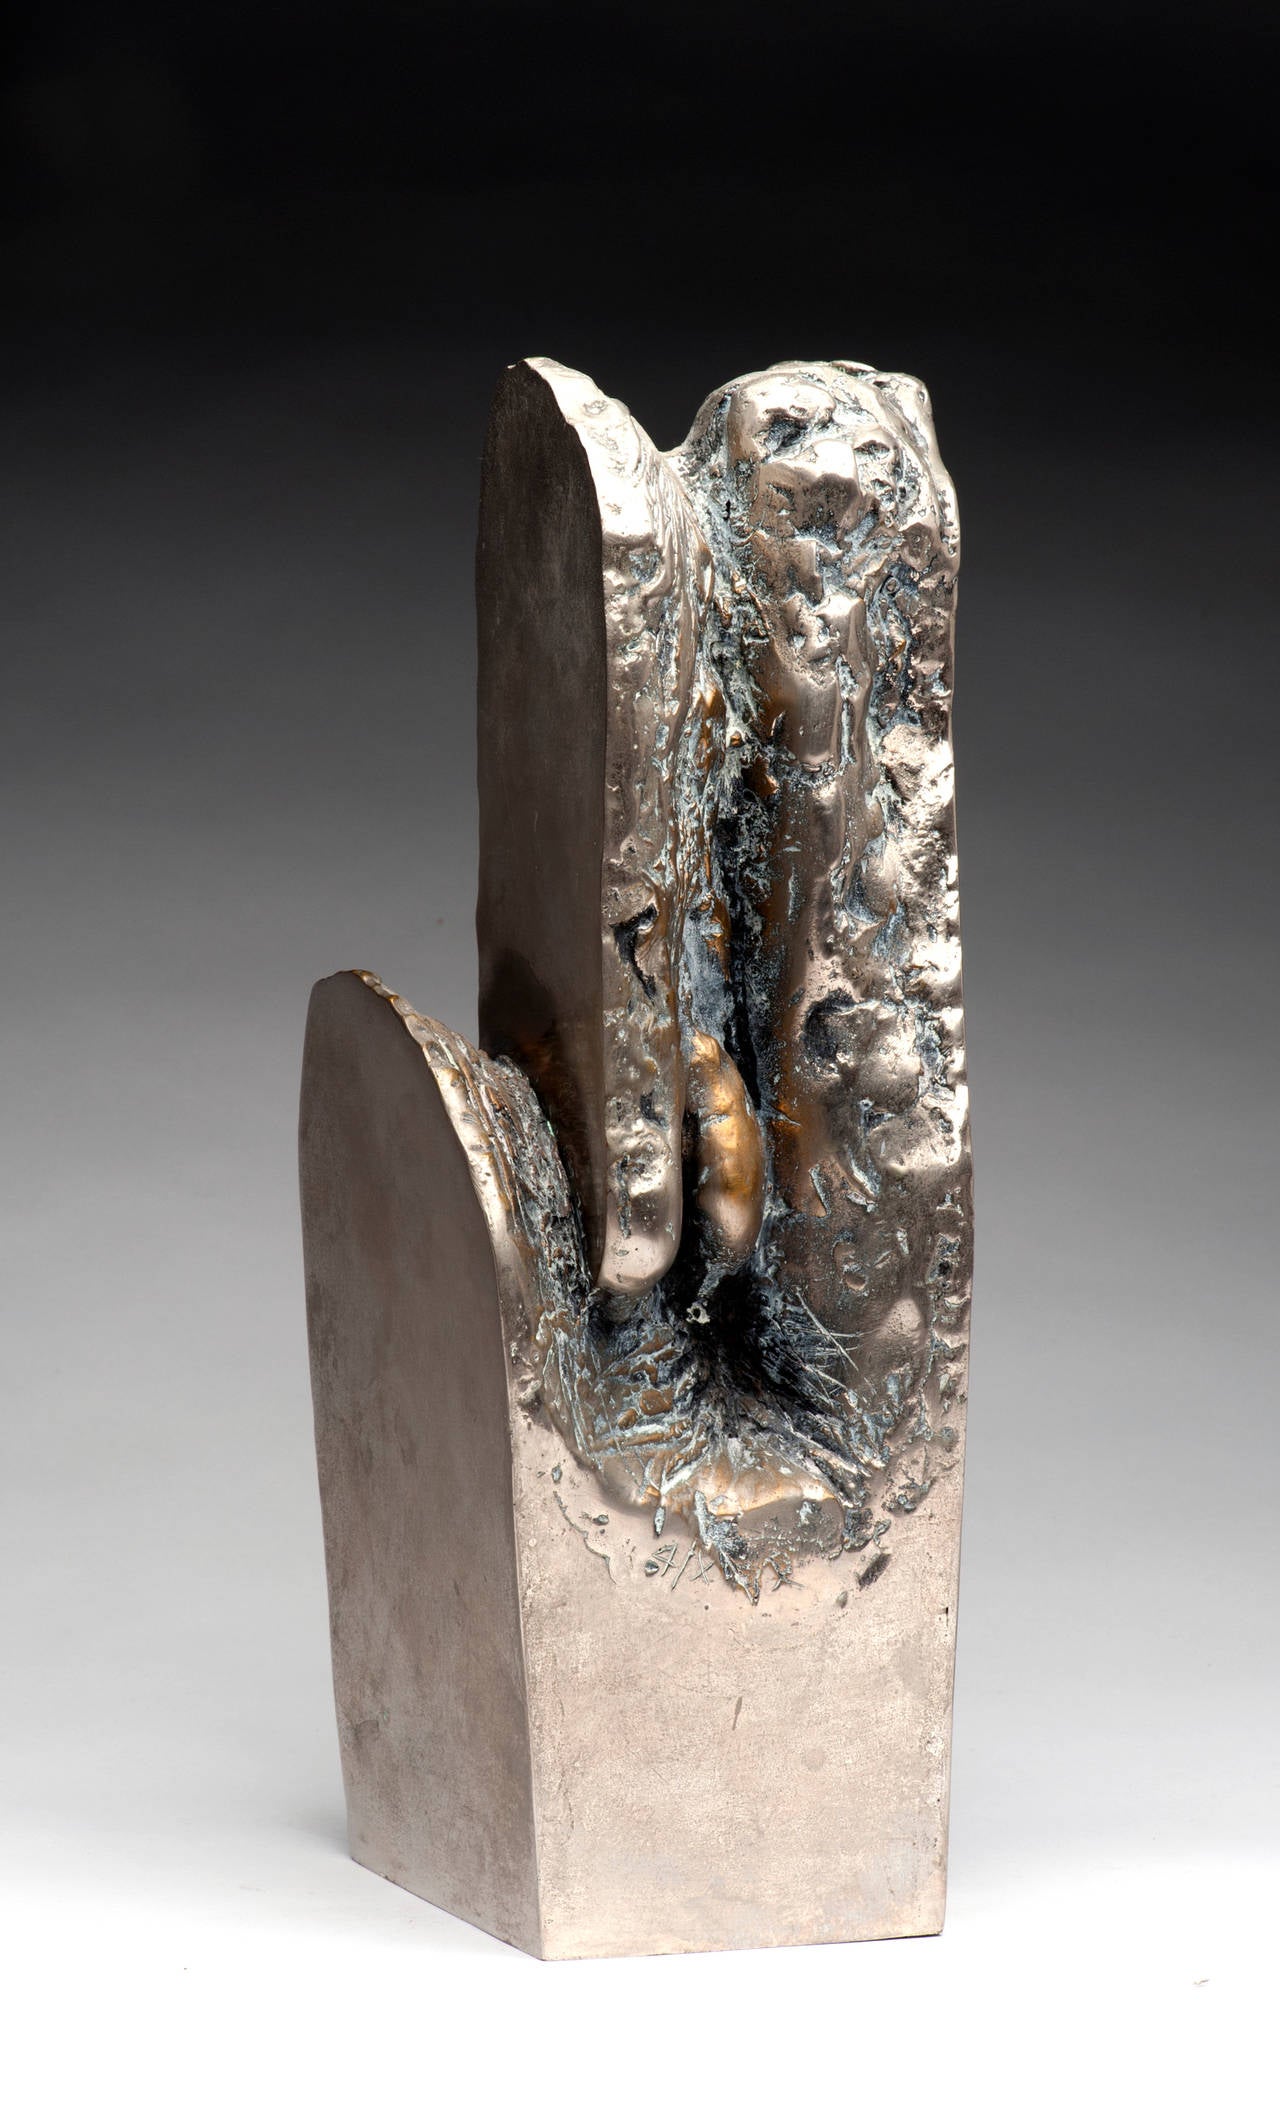 Bronze sculpture with silver patina by Rau´l Valdivieso (Chilean, 1931-1933).
Label on underside, 4/10.